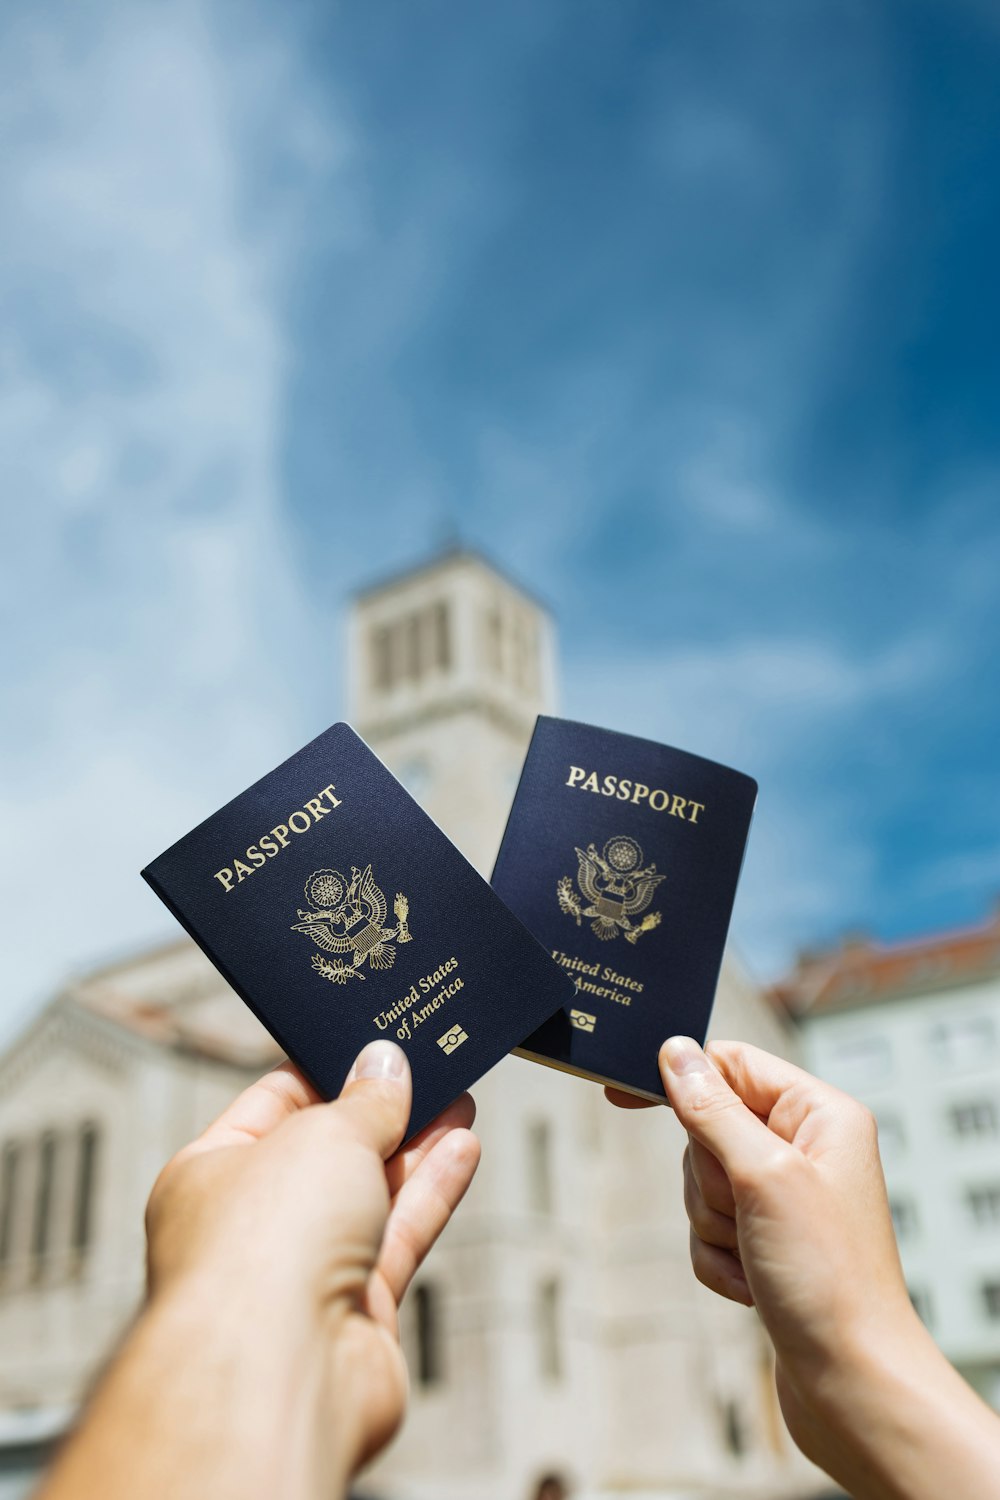 two people holding up two passports in front of a building